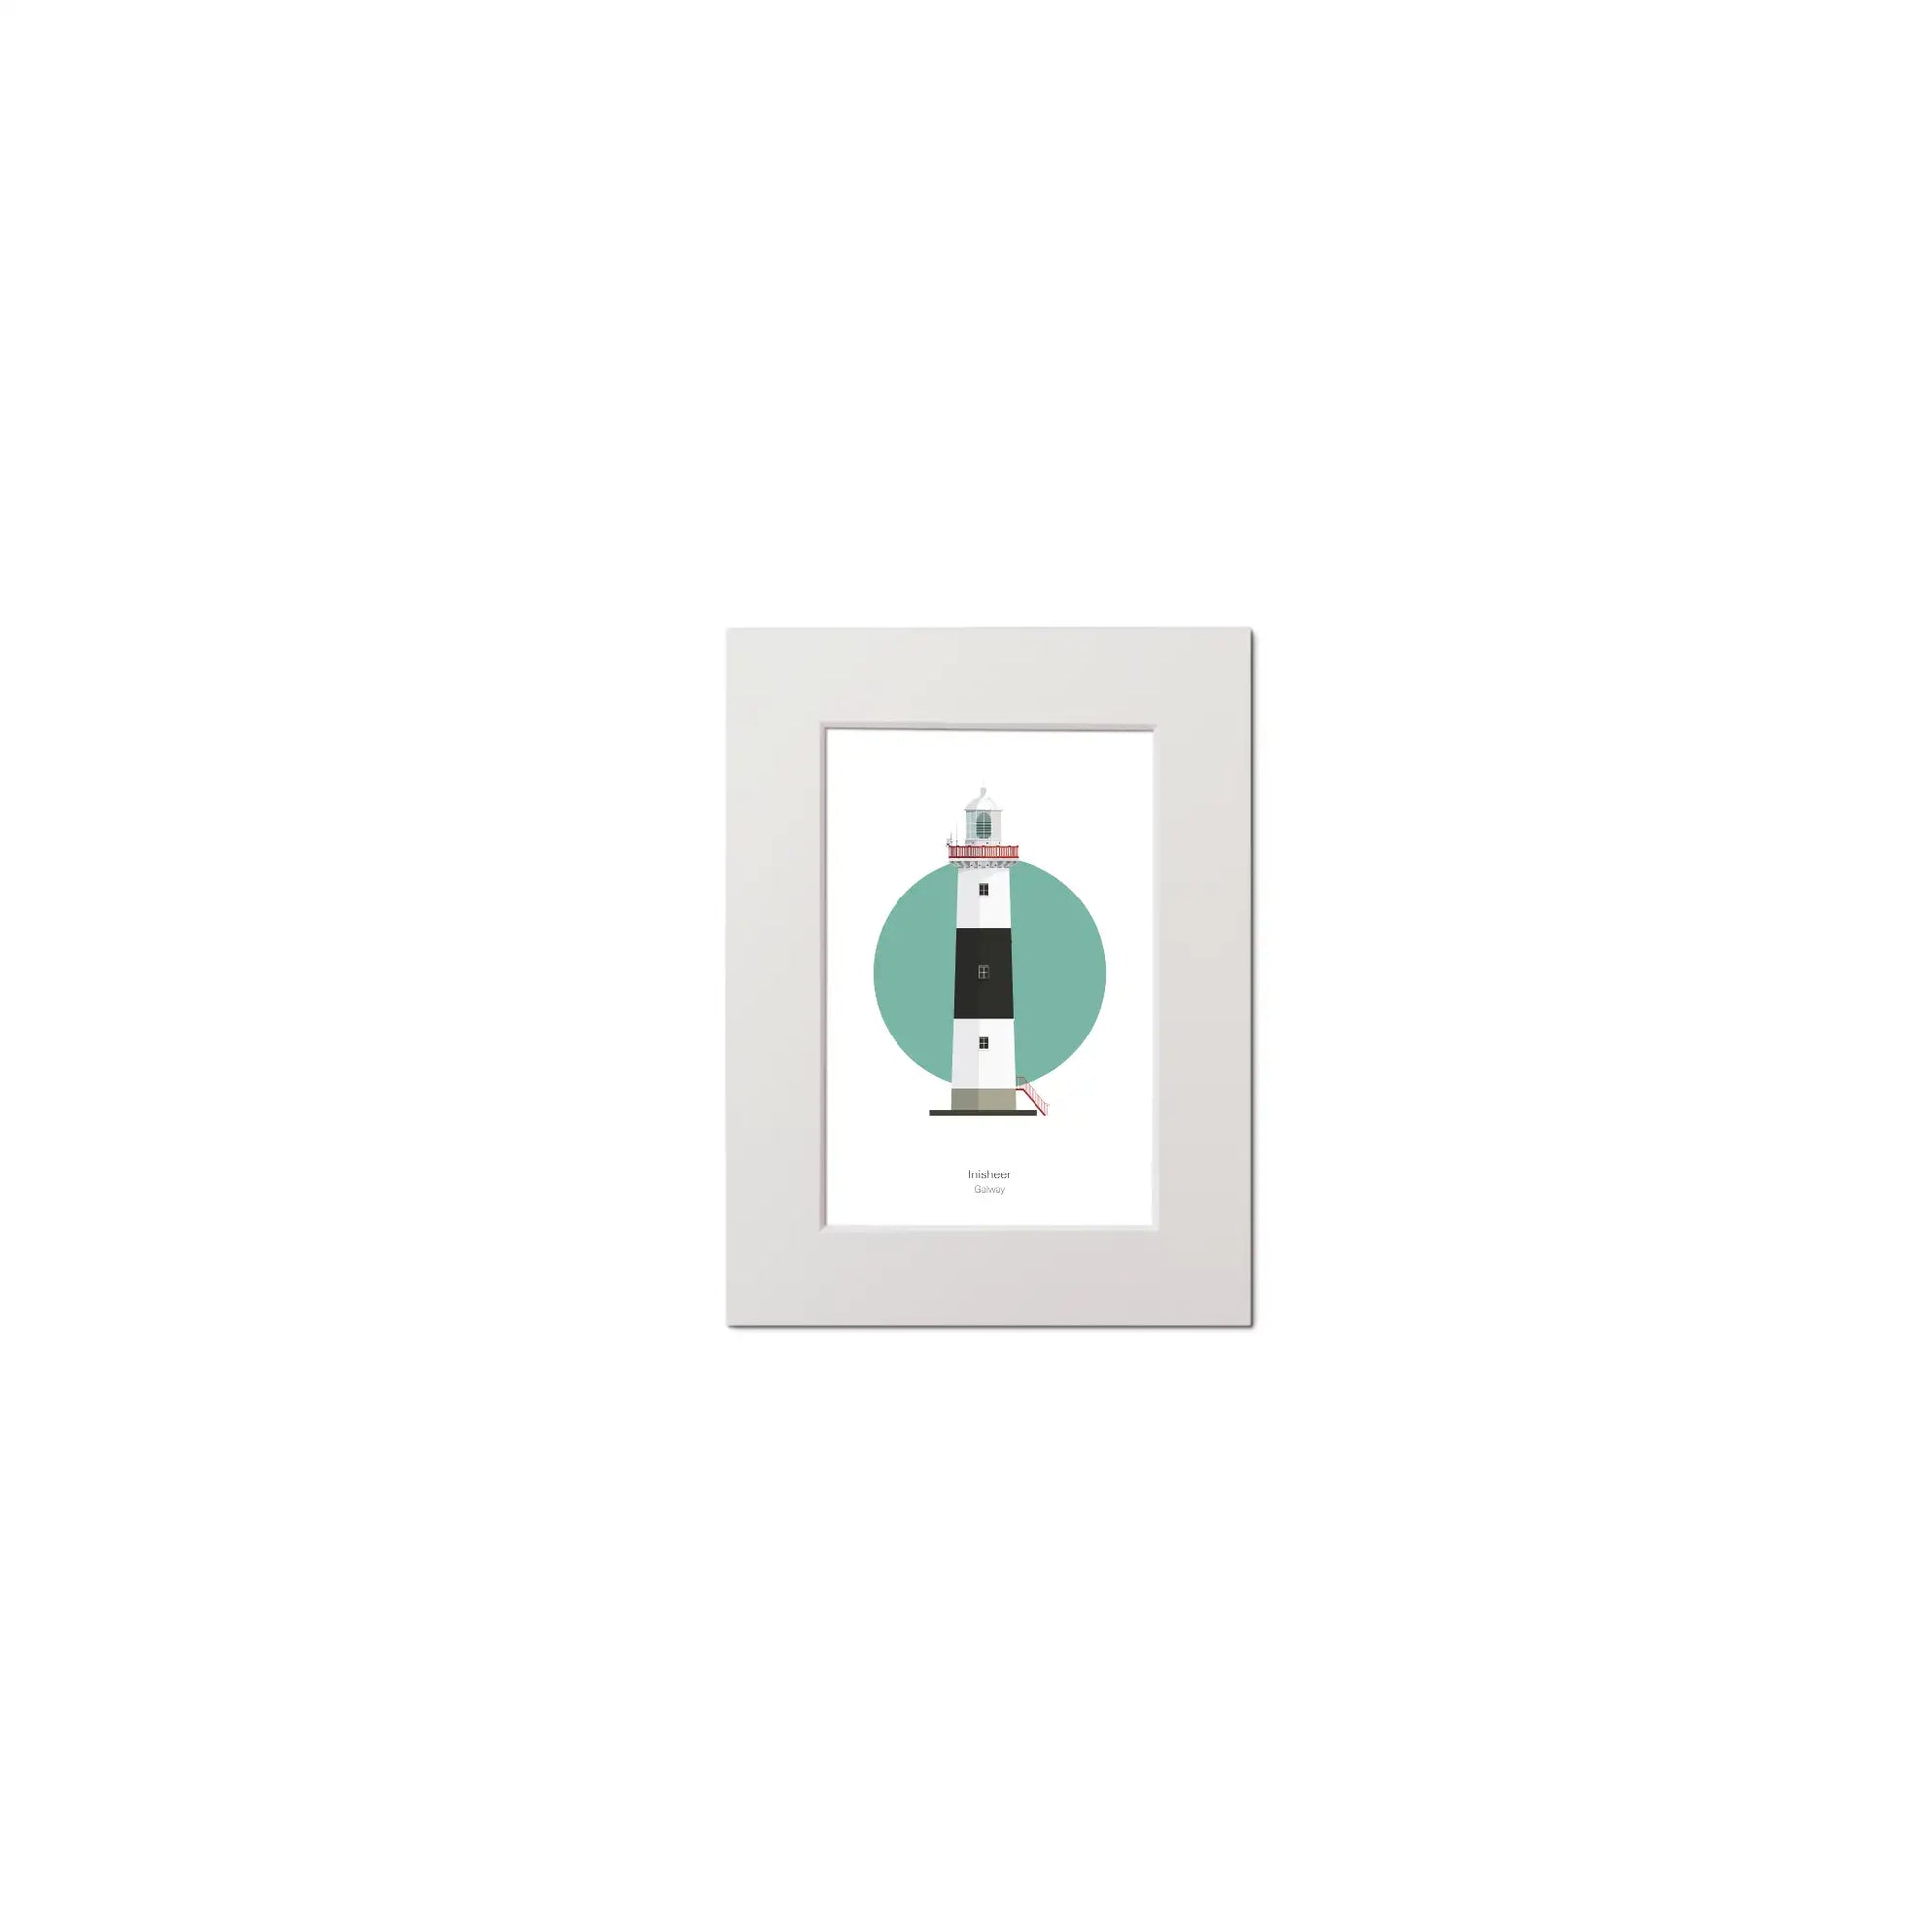 Contemporary graphic illustration of Inisheer lighthouse on a white background inside light blue square, mounted and measuring 15x20cm.